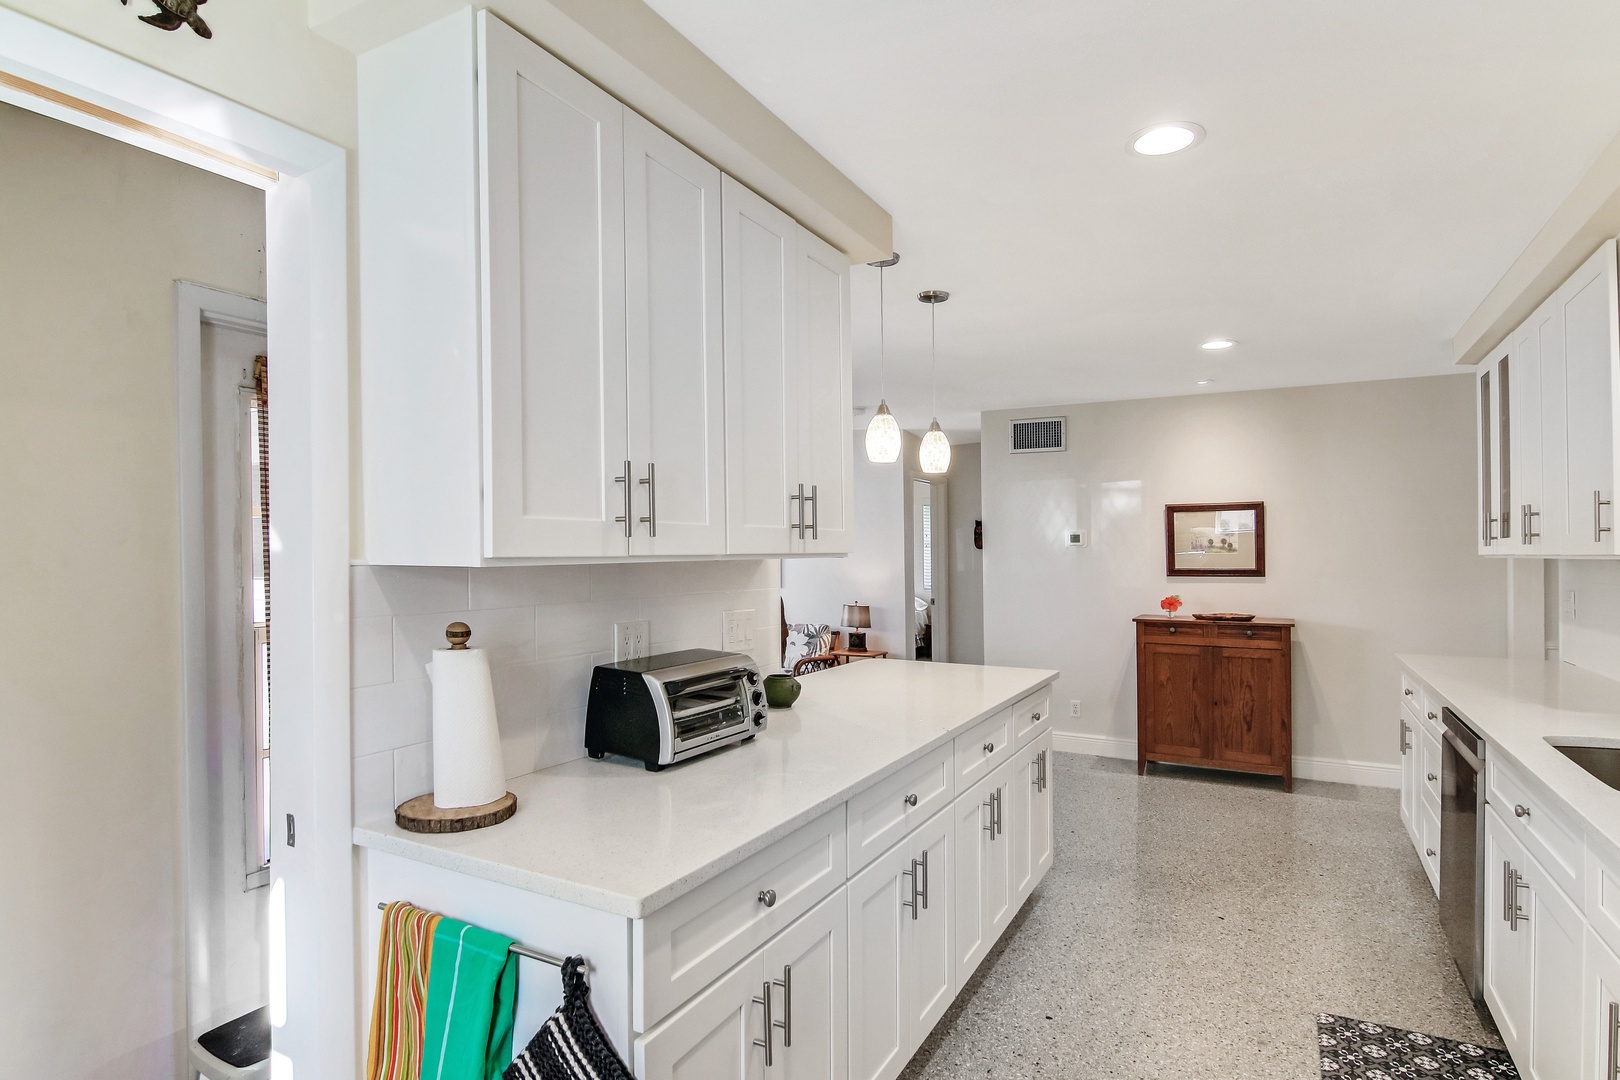 The bright, cheerful kitchen offers ample space & all the comforts of home